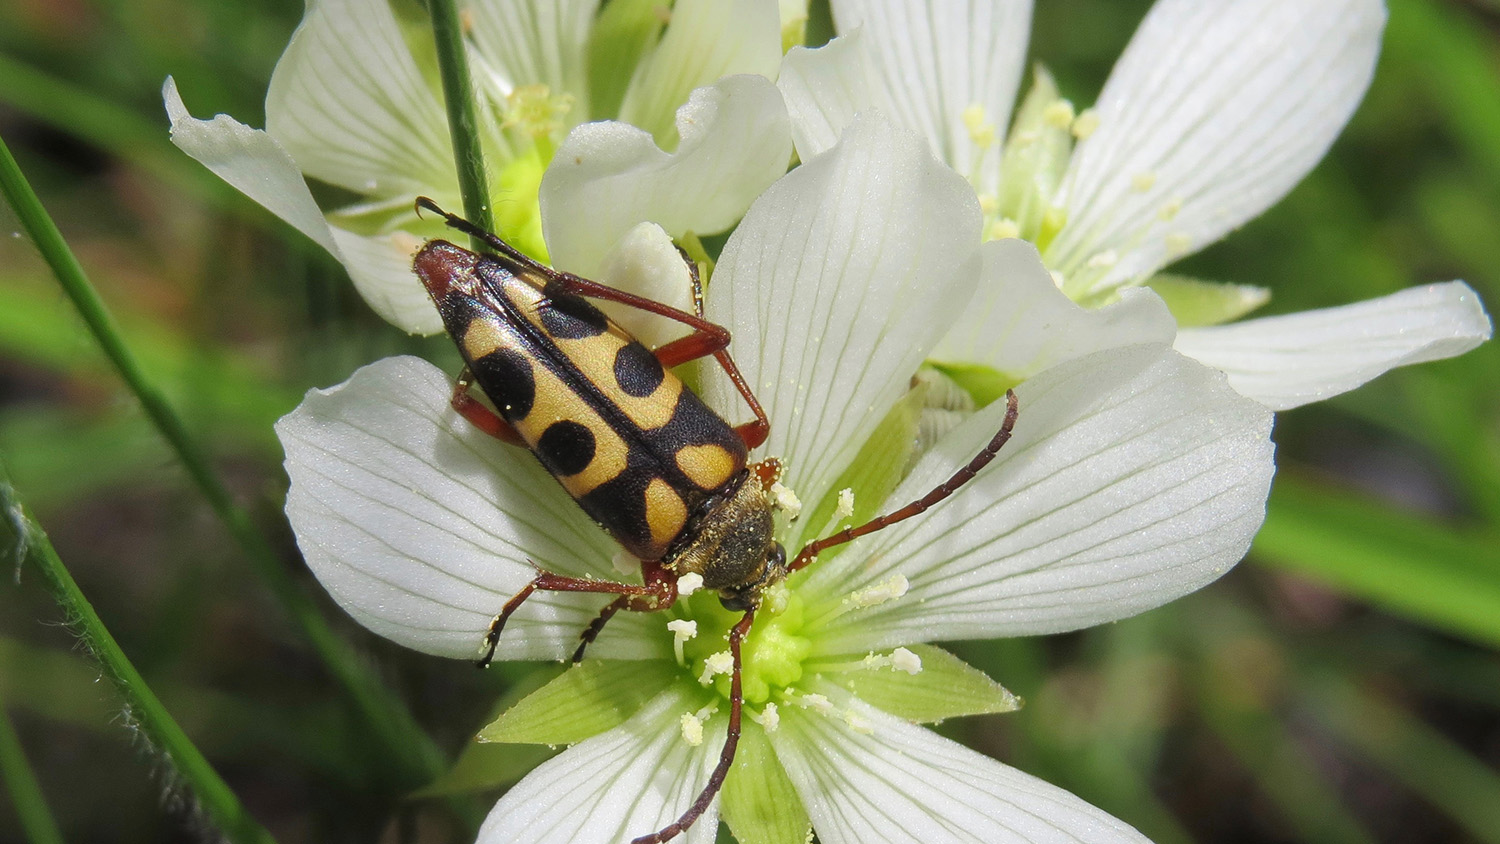 spotted beetle on a white flower